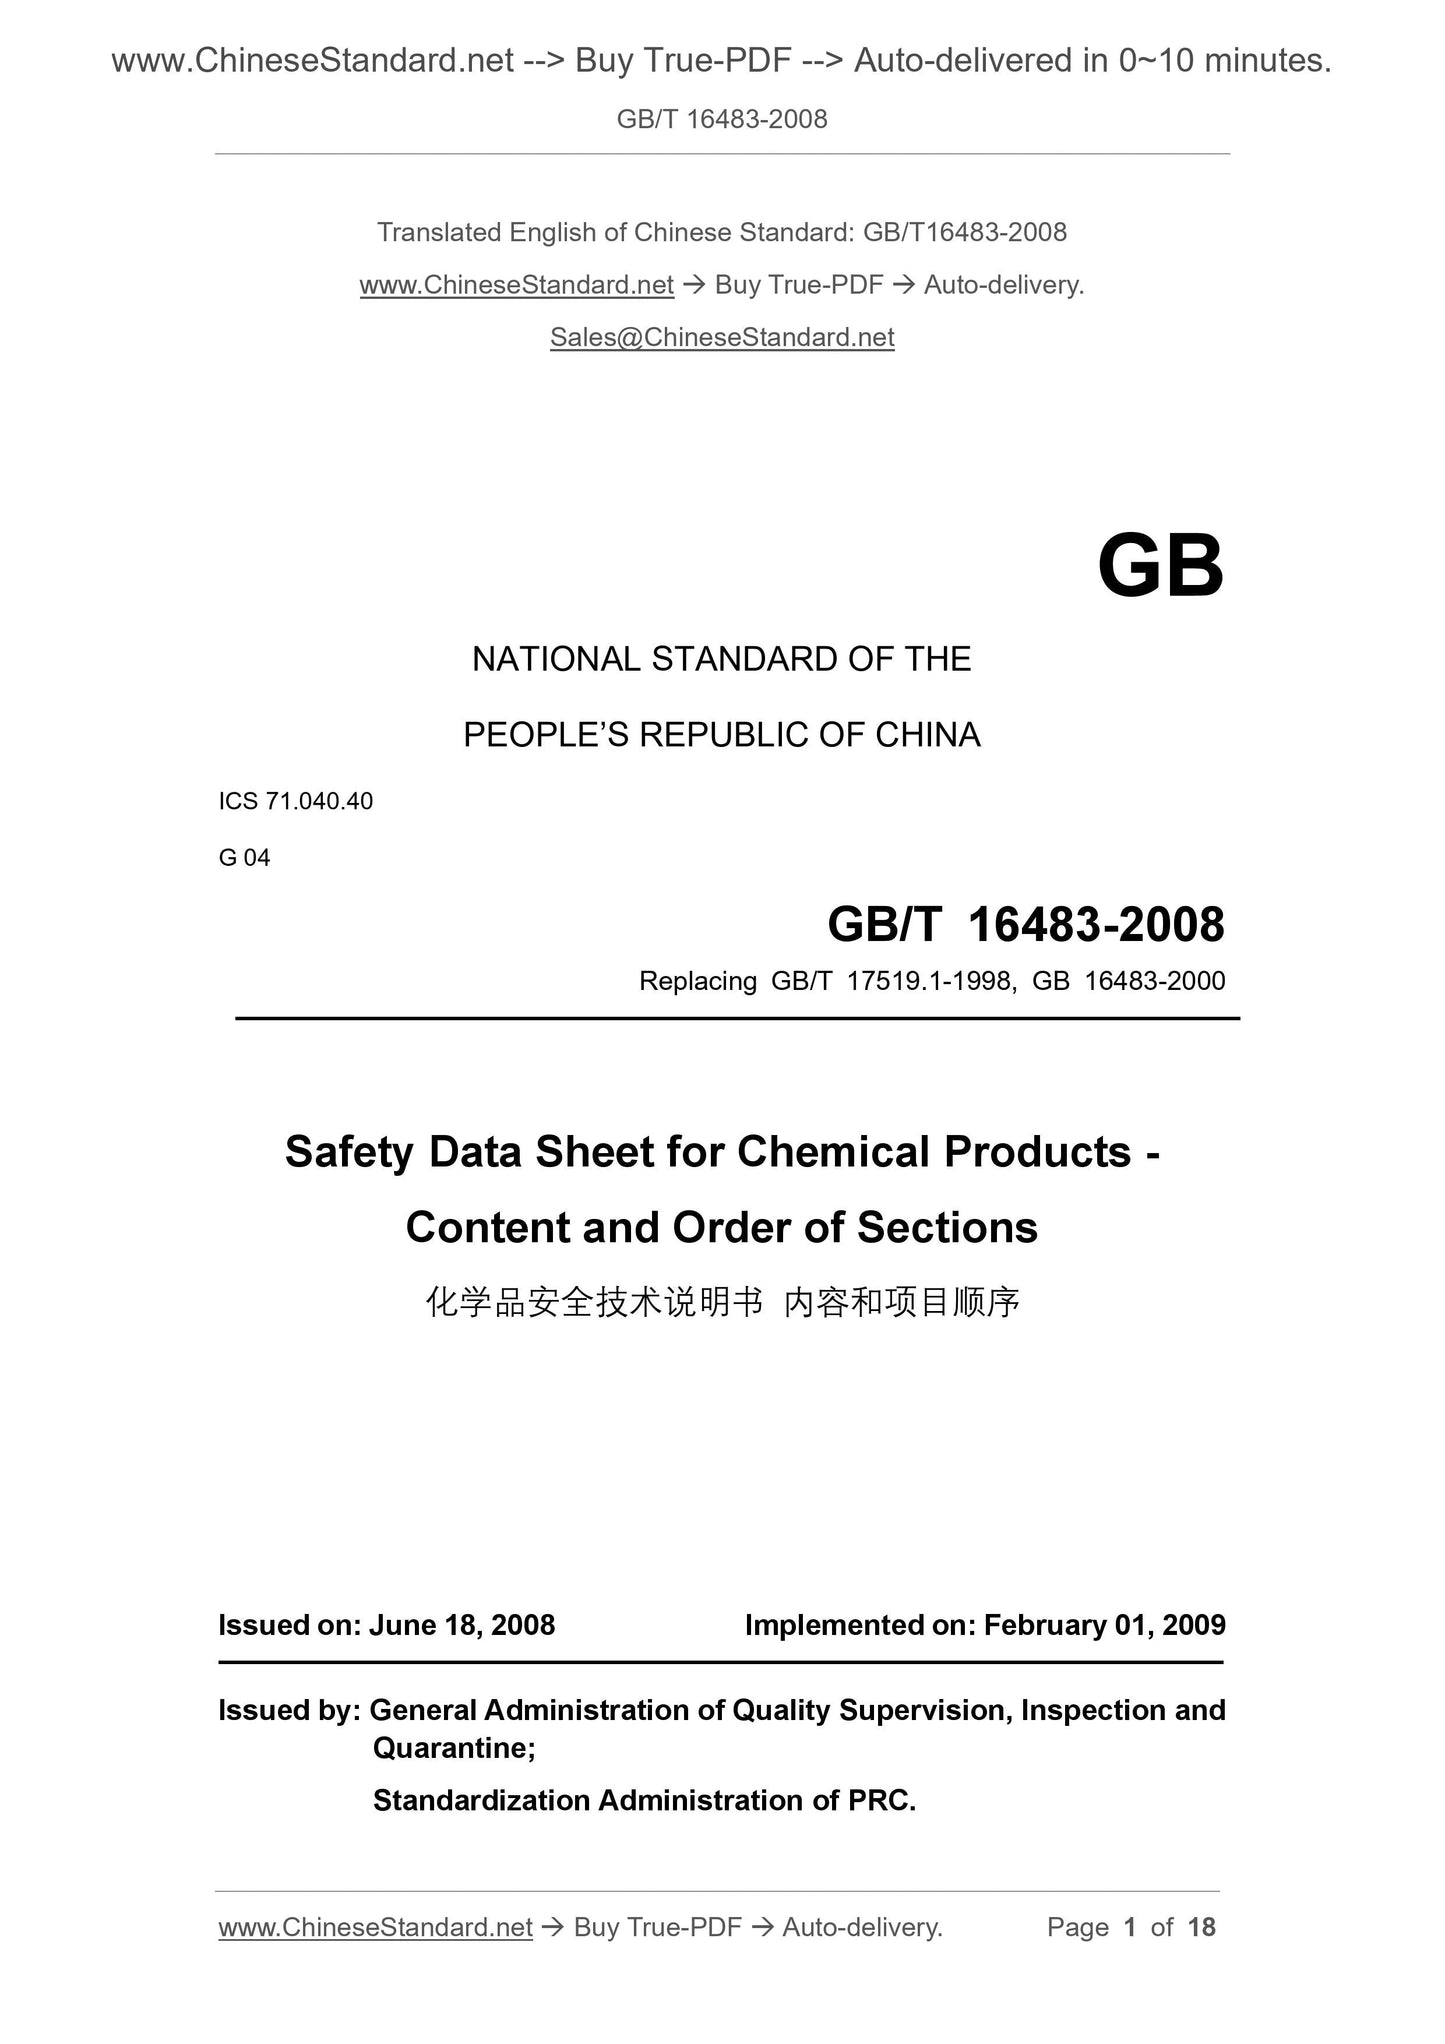 GB/T 16483-2008 Page 1